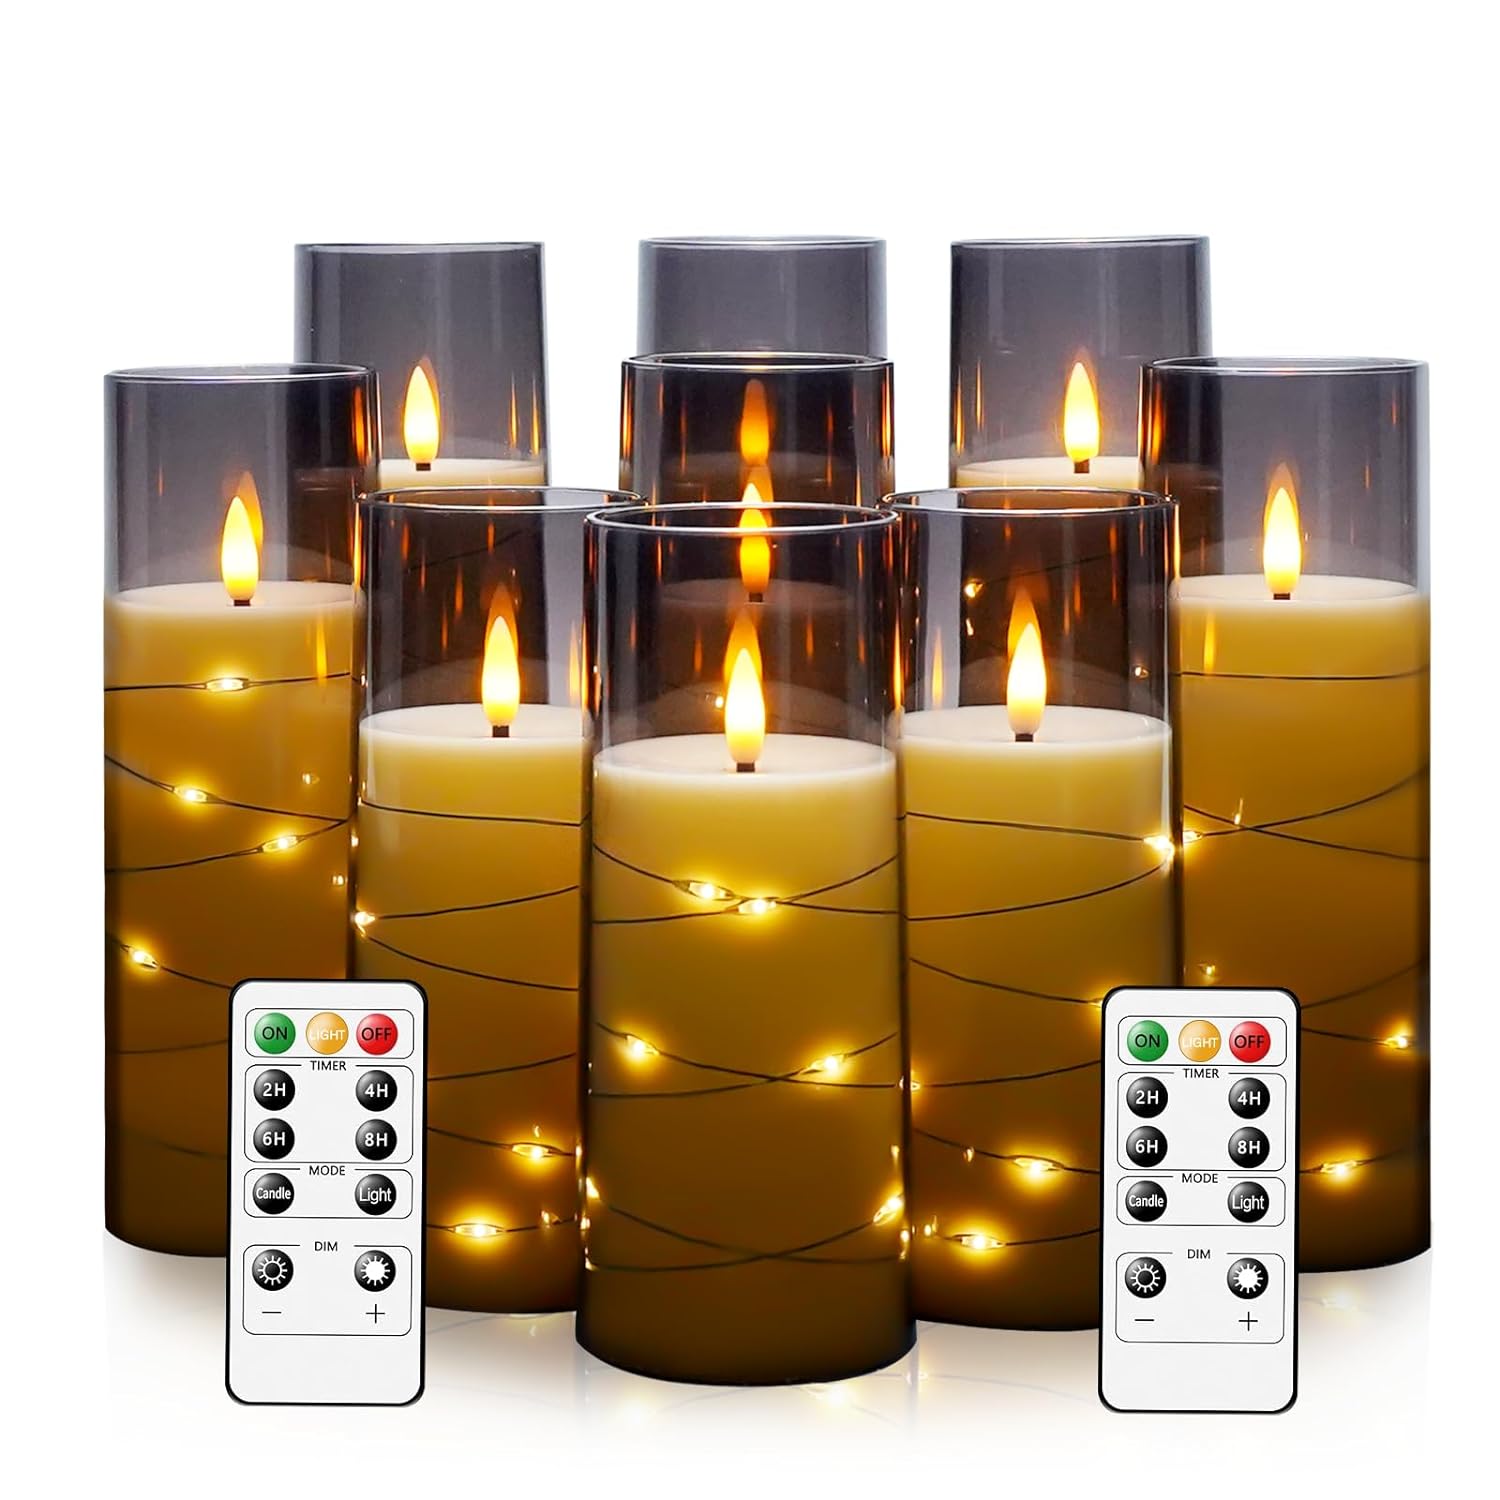 kakoya Flameless LED Candles with Timer 9 Pc Flickering Flameless Candles for Romantic Ambiance and Home Decoration Durable Acrylic Shell,with Embedded Star String，Battery Operated Candles（Grey）